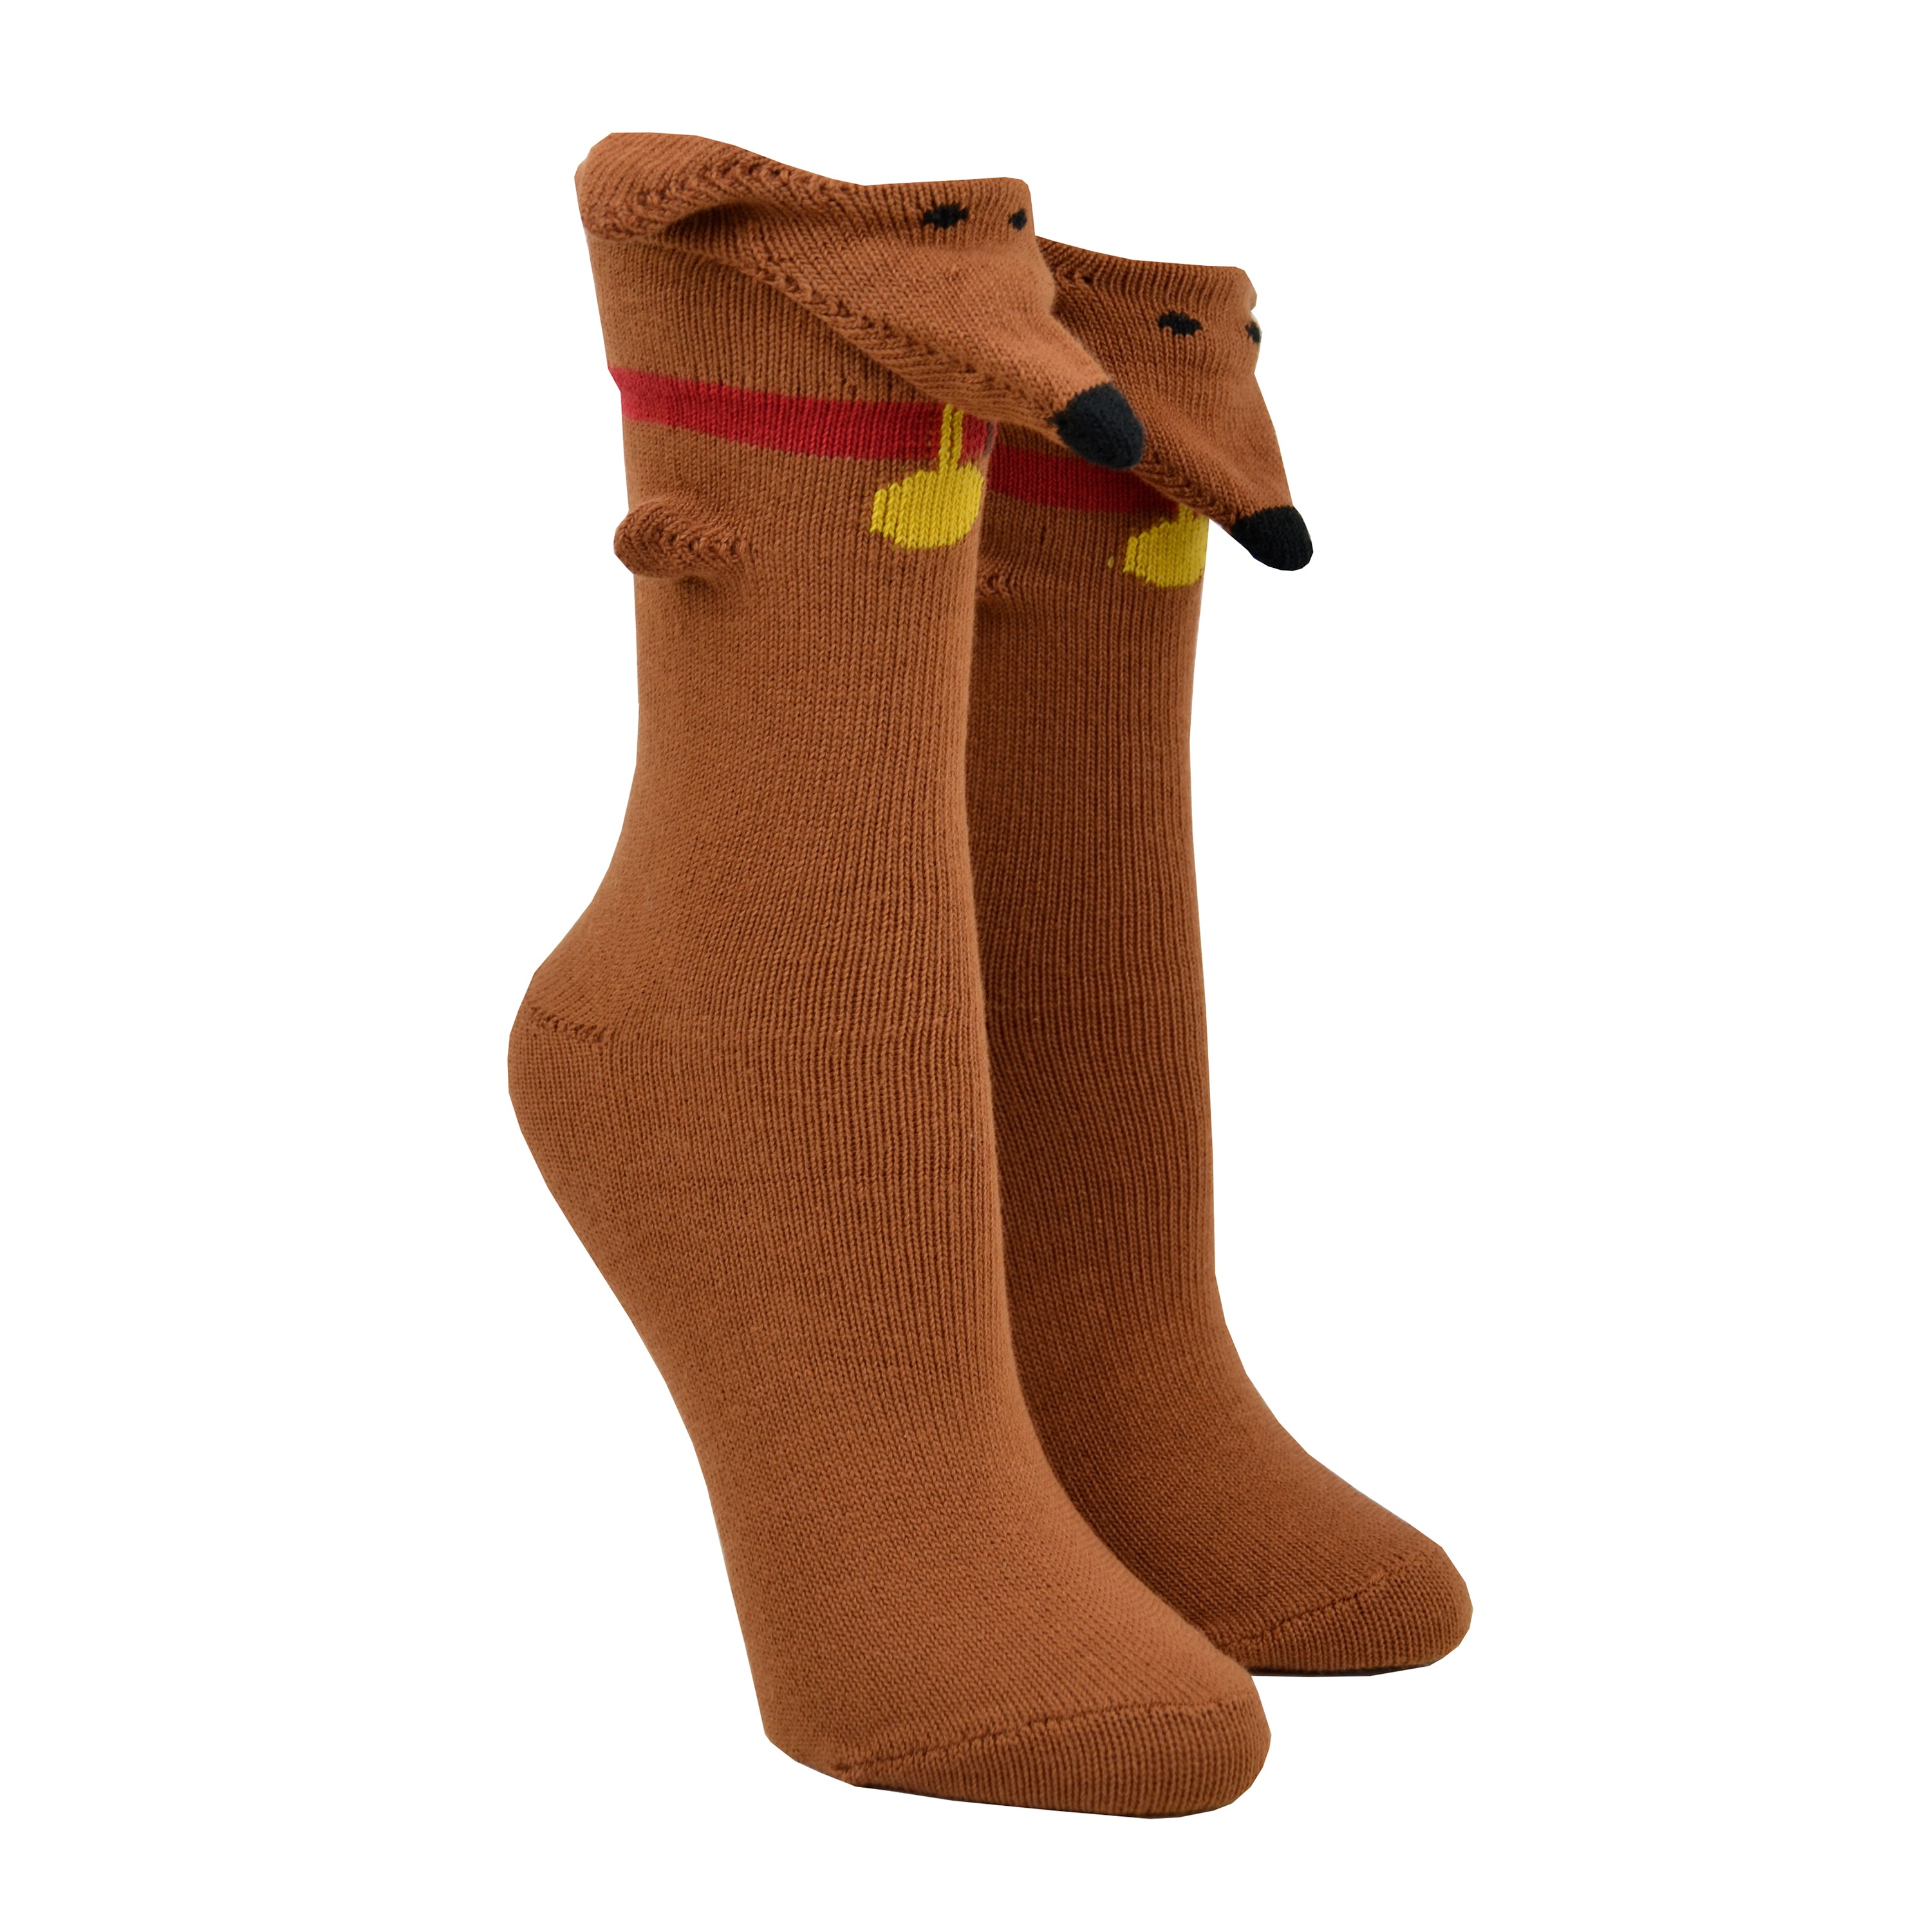 Shown on a foot mold, a pair of Foot Traffic, brown cotton women's crew socks with three dimensional pattern of cute brown dachshund dog